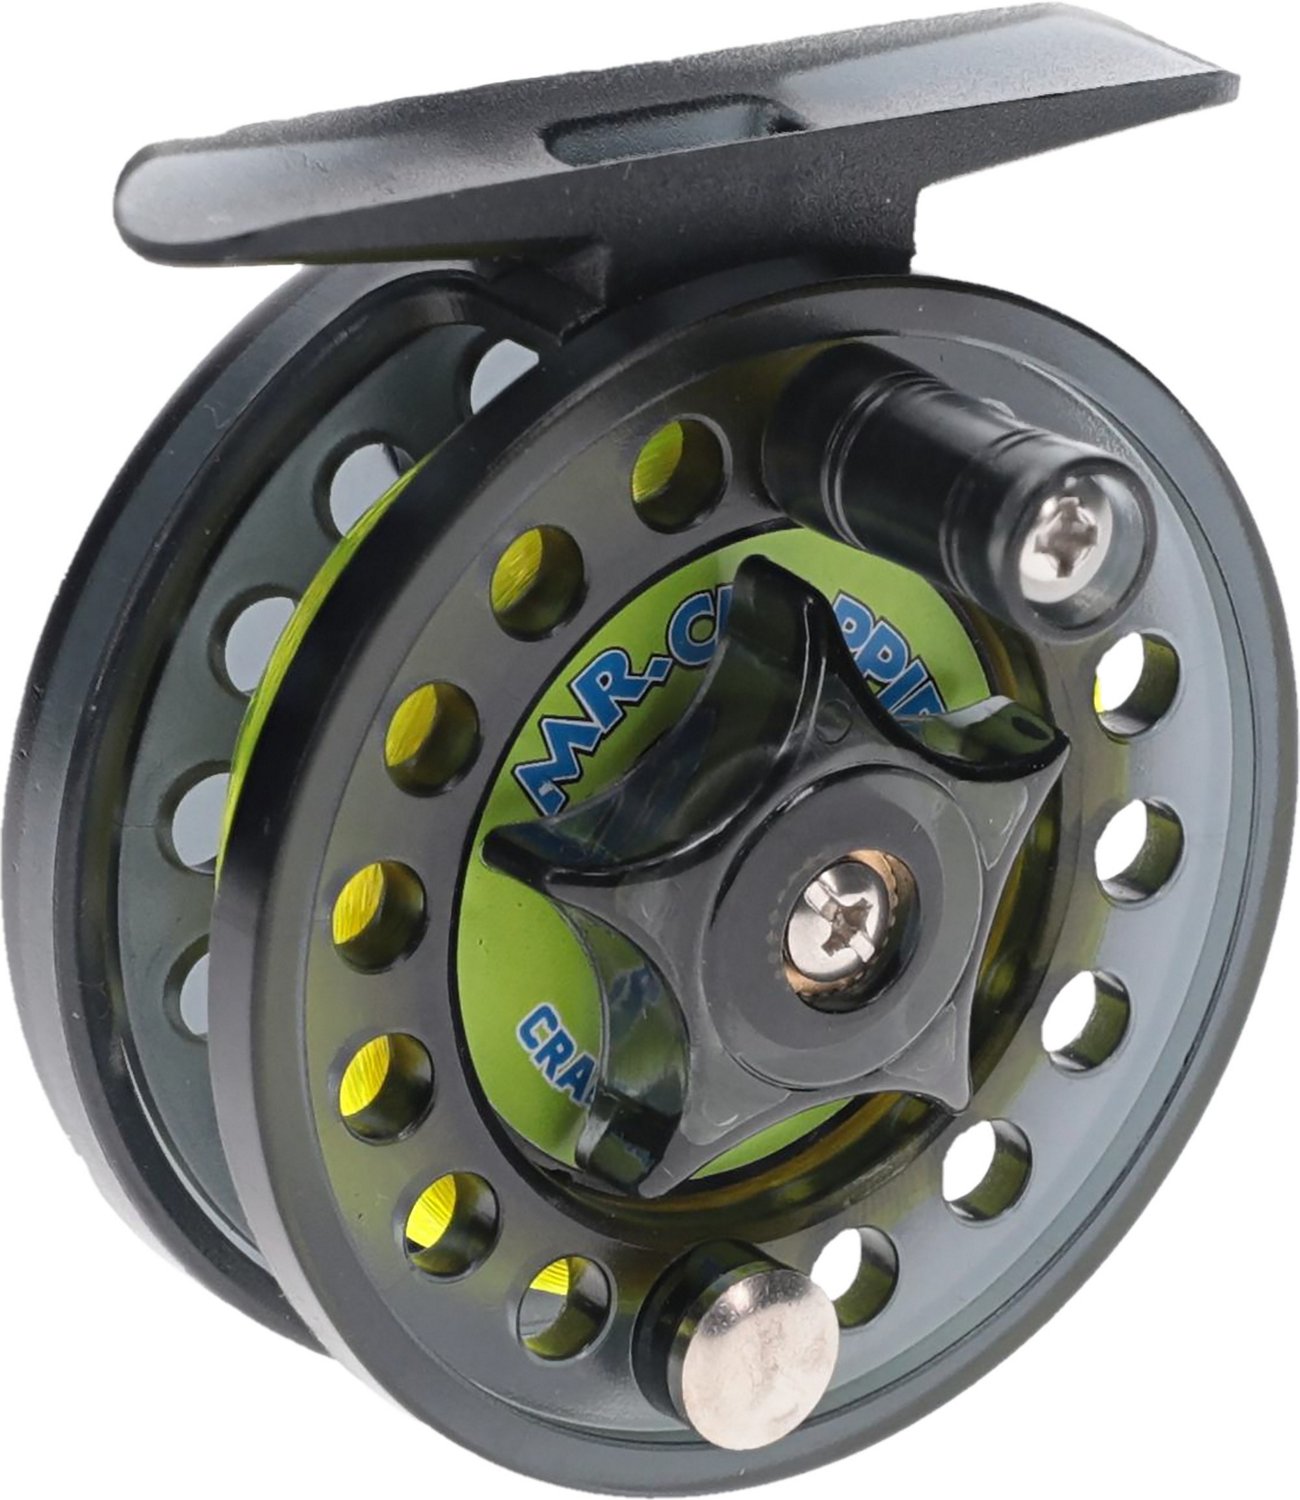 Academy Sports + Outdoors Crappie Thunder Jigging And Trolling Reel